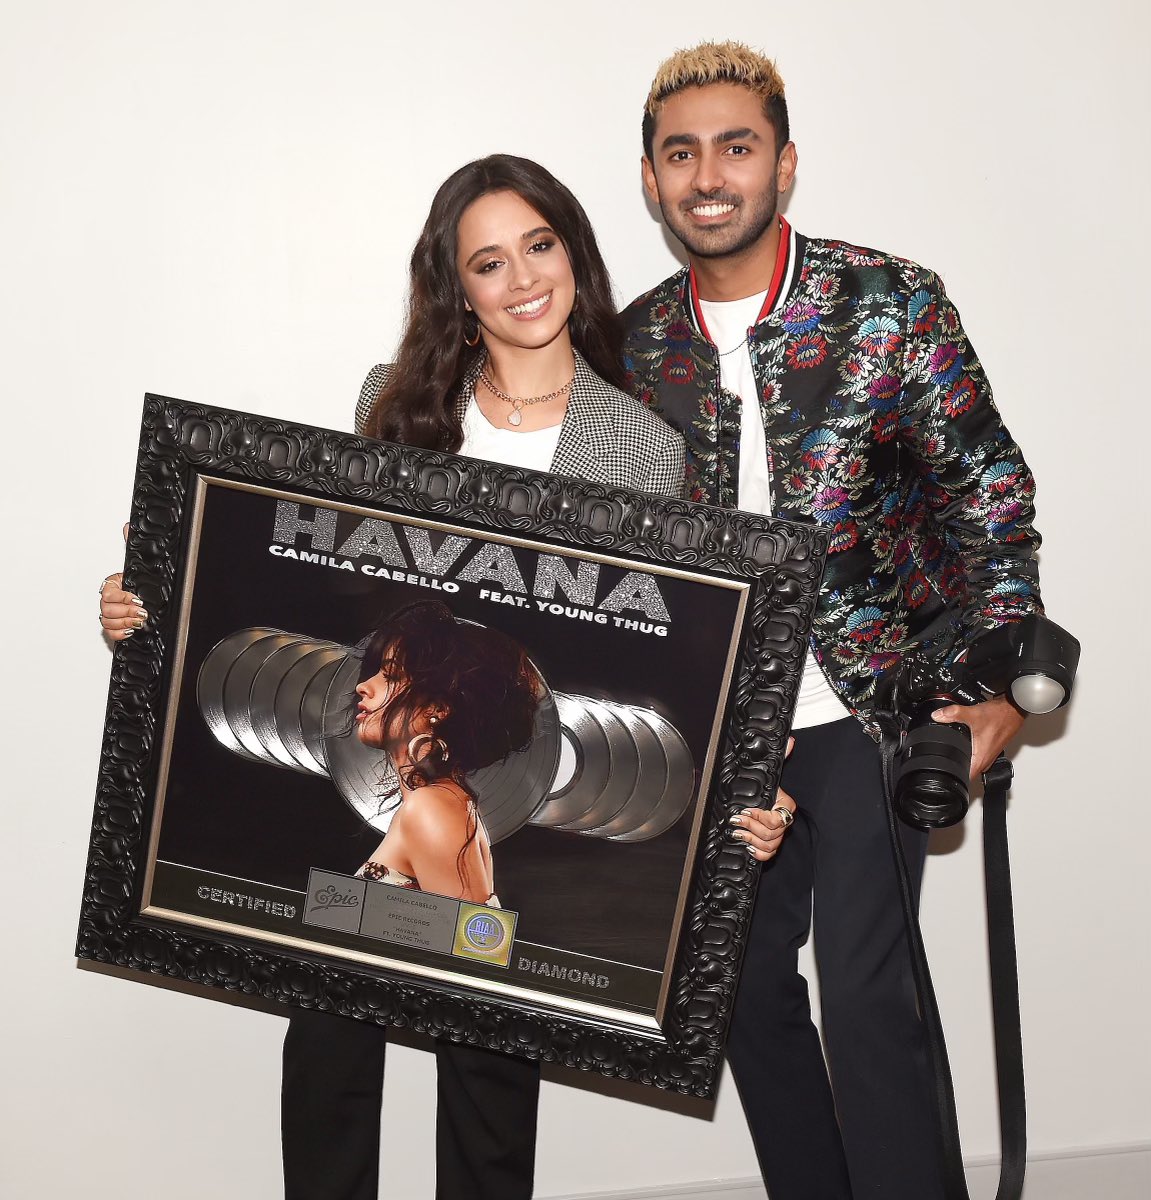 💎 HAVANA IS CERTIFIED DIAMOND 💎 10 million units sold (US) 💿 congratulations @Camila_Cabello on this huge achievement! 👏 Many years of hard work! Proud of you, C! 👏